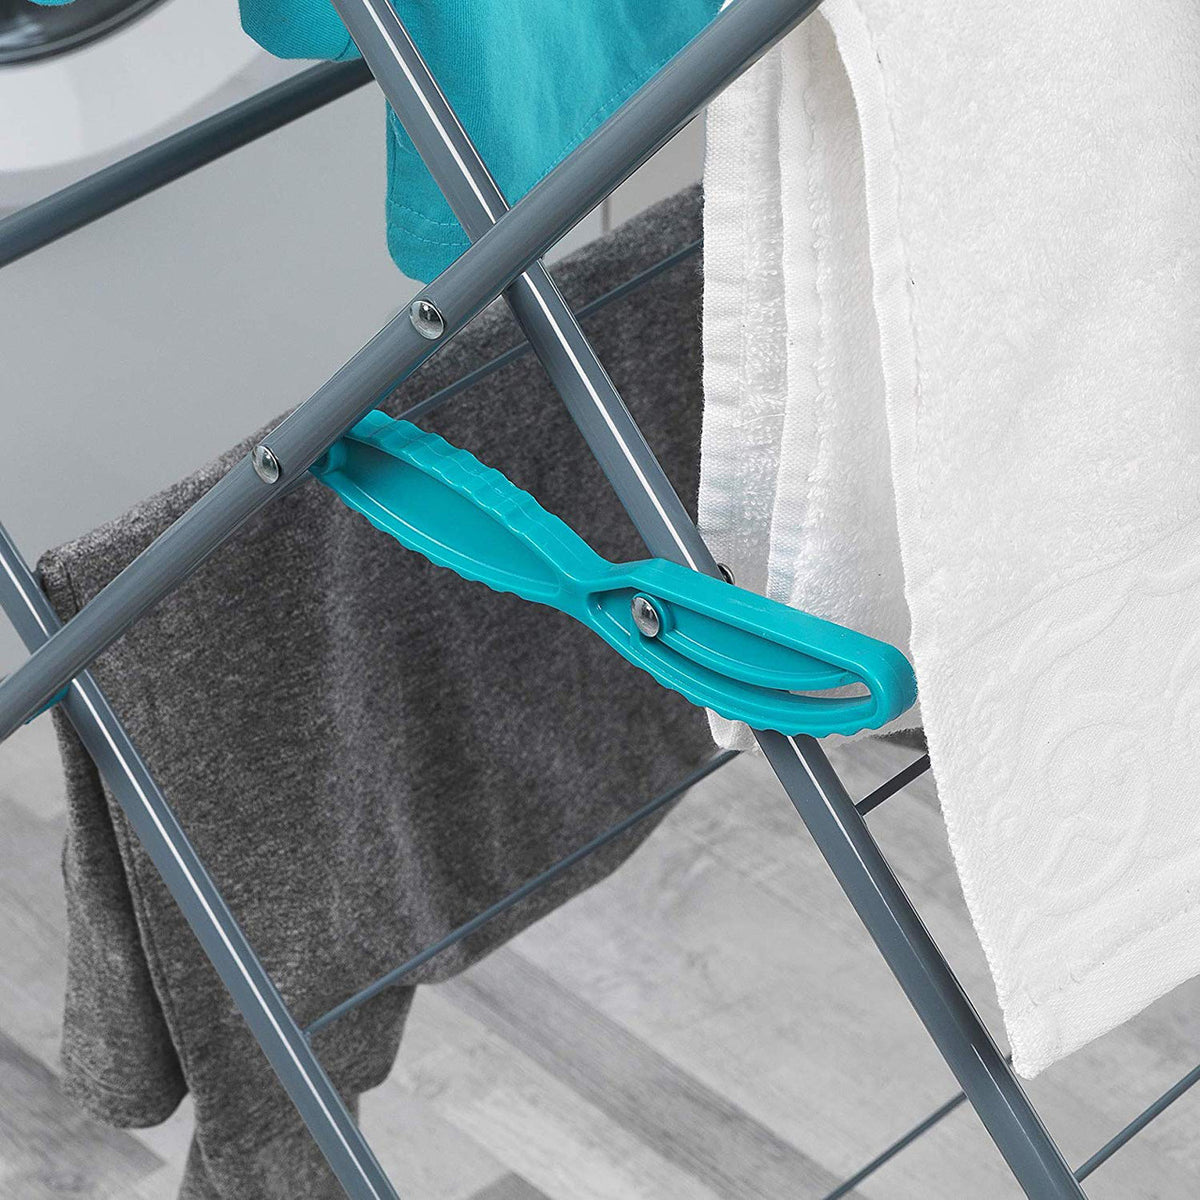 Beldray 3 Tier Elegant Clothes Horse Laundry Airer - Blue | LA050397XEU7 from Beldray - DID Electrical